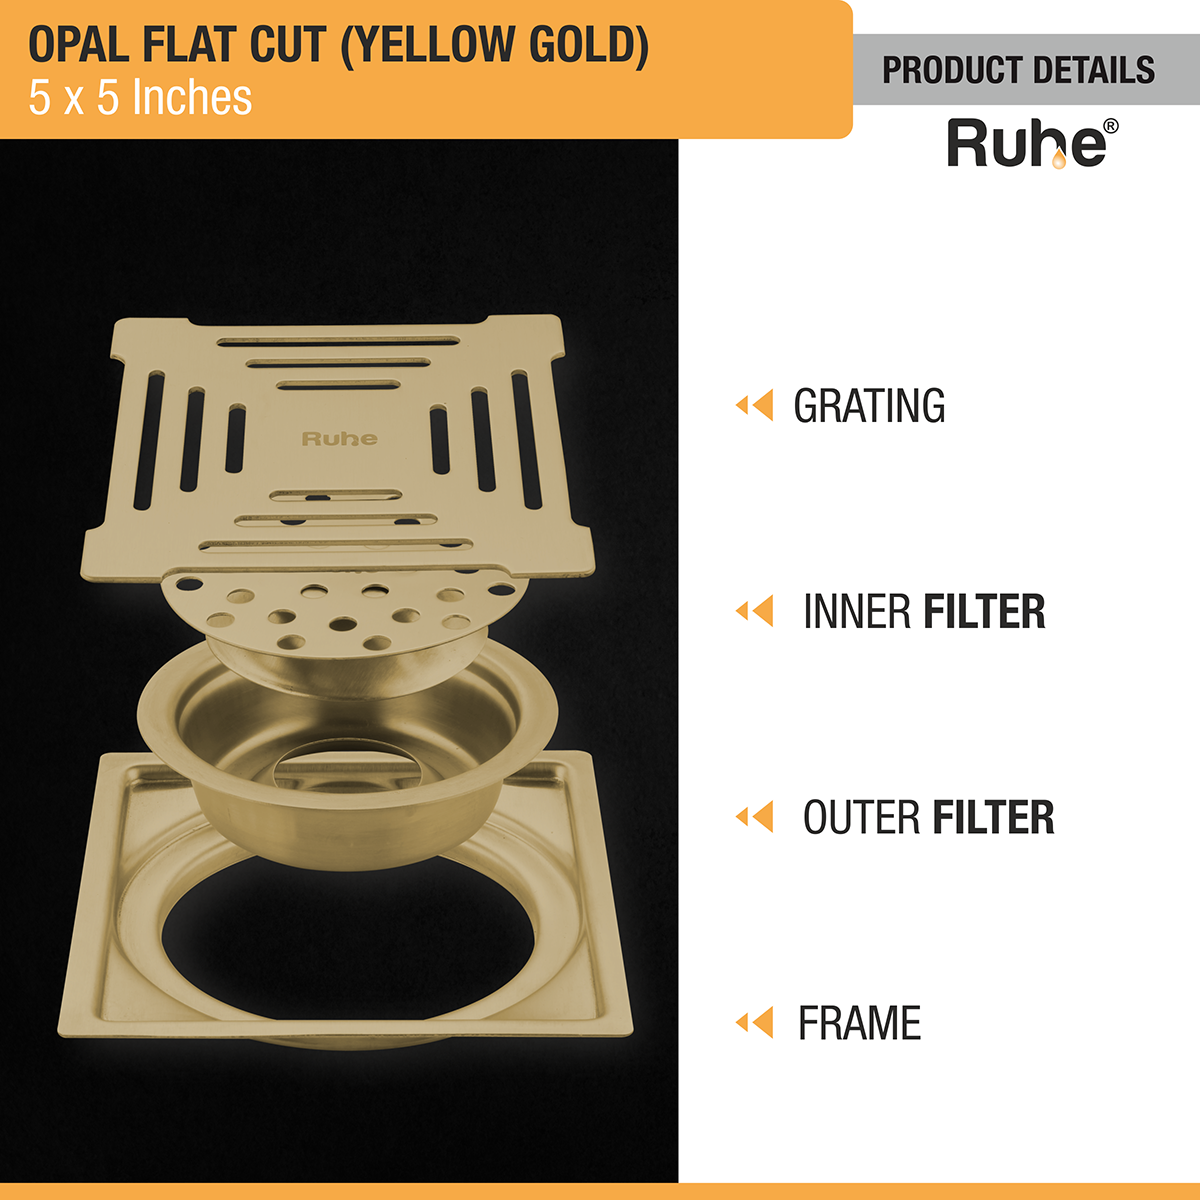 Opal Square Flat Cut Floor Drain in Yellow Gold PVD Coating (5 x 5 Inches) product details